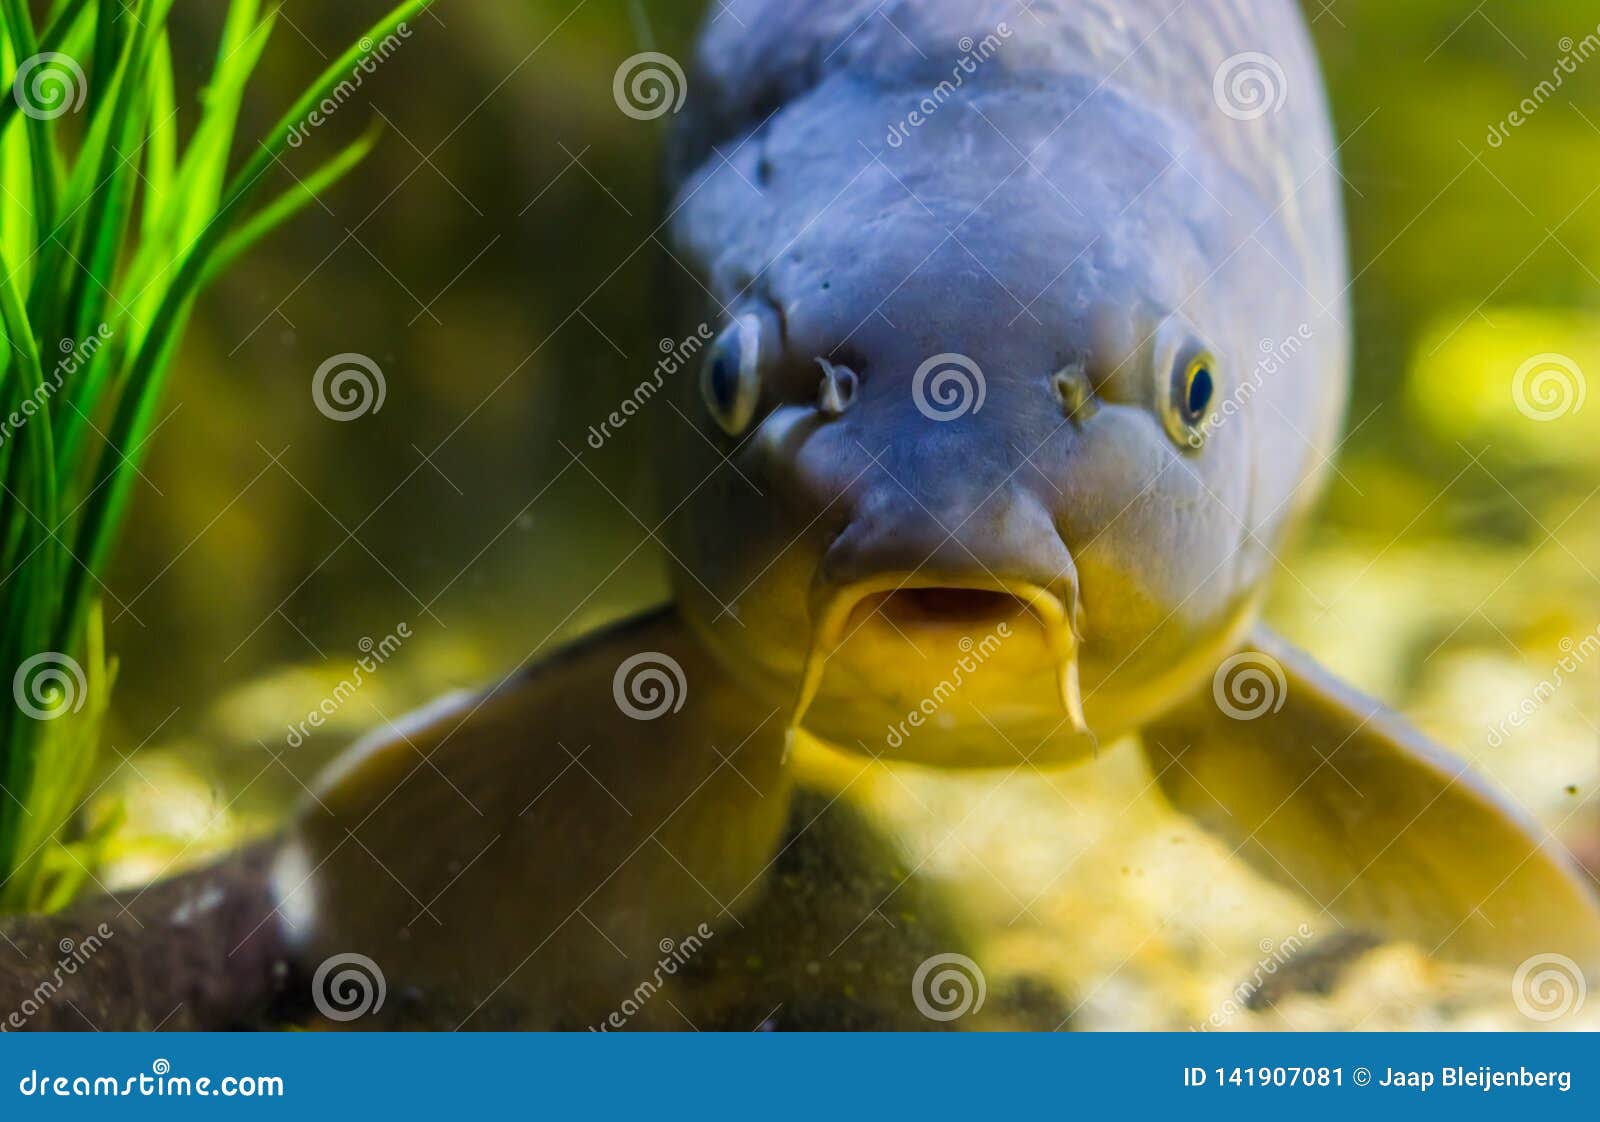 funny fish face